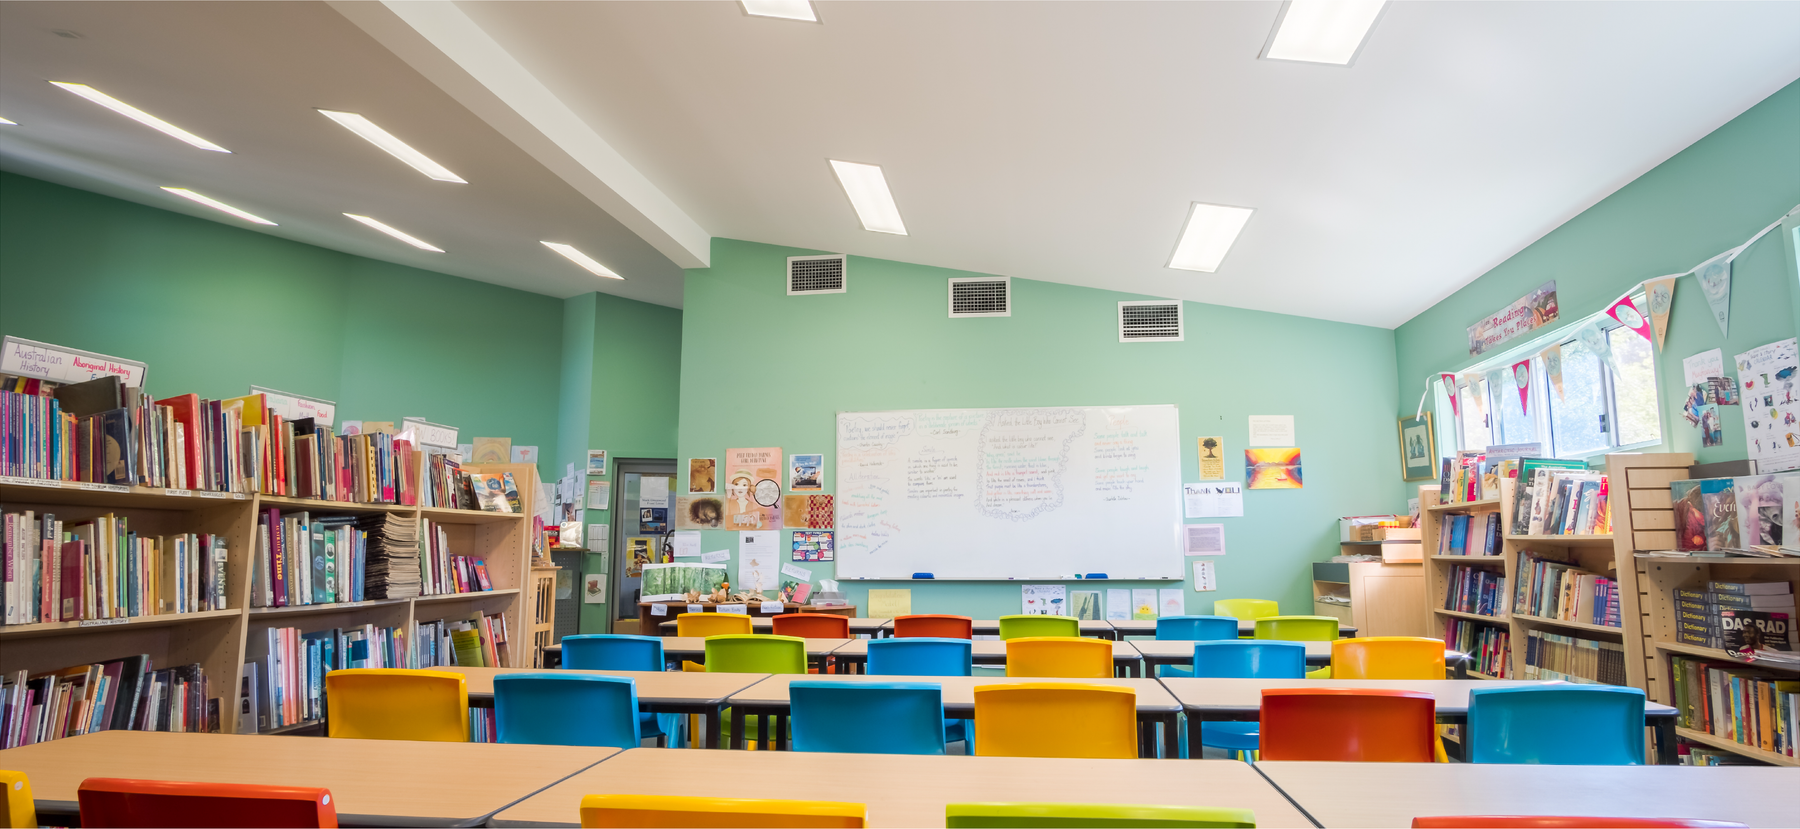 School Cleaning Procedures: Maintaining a Healthy Environment